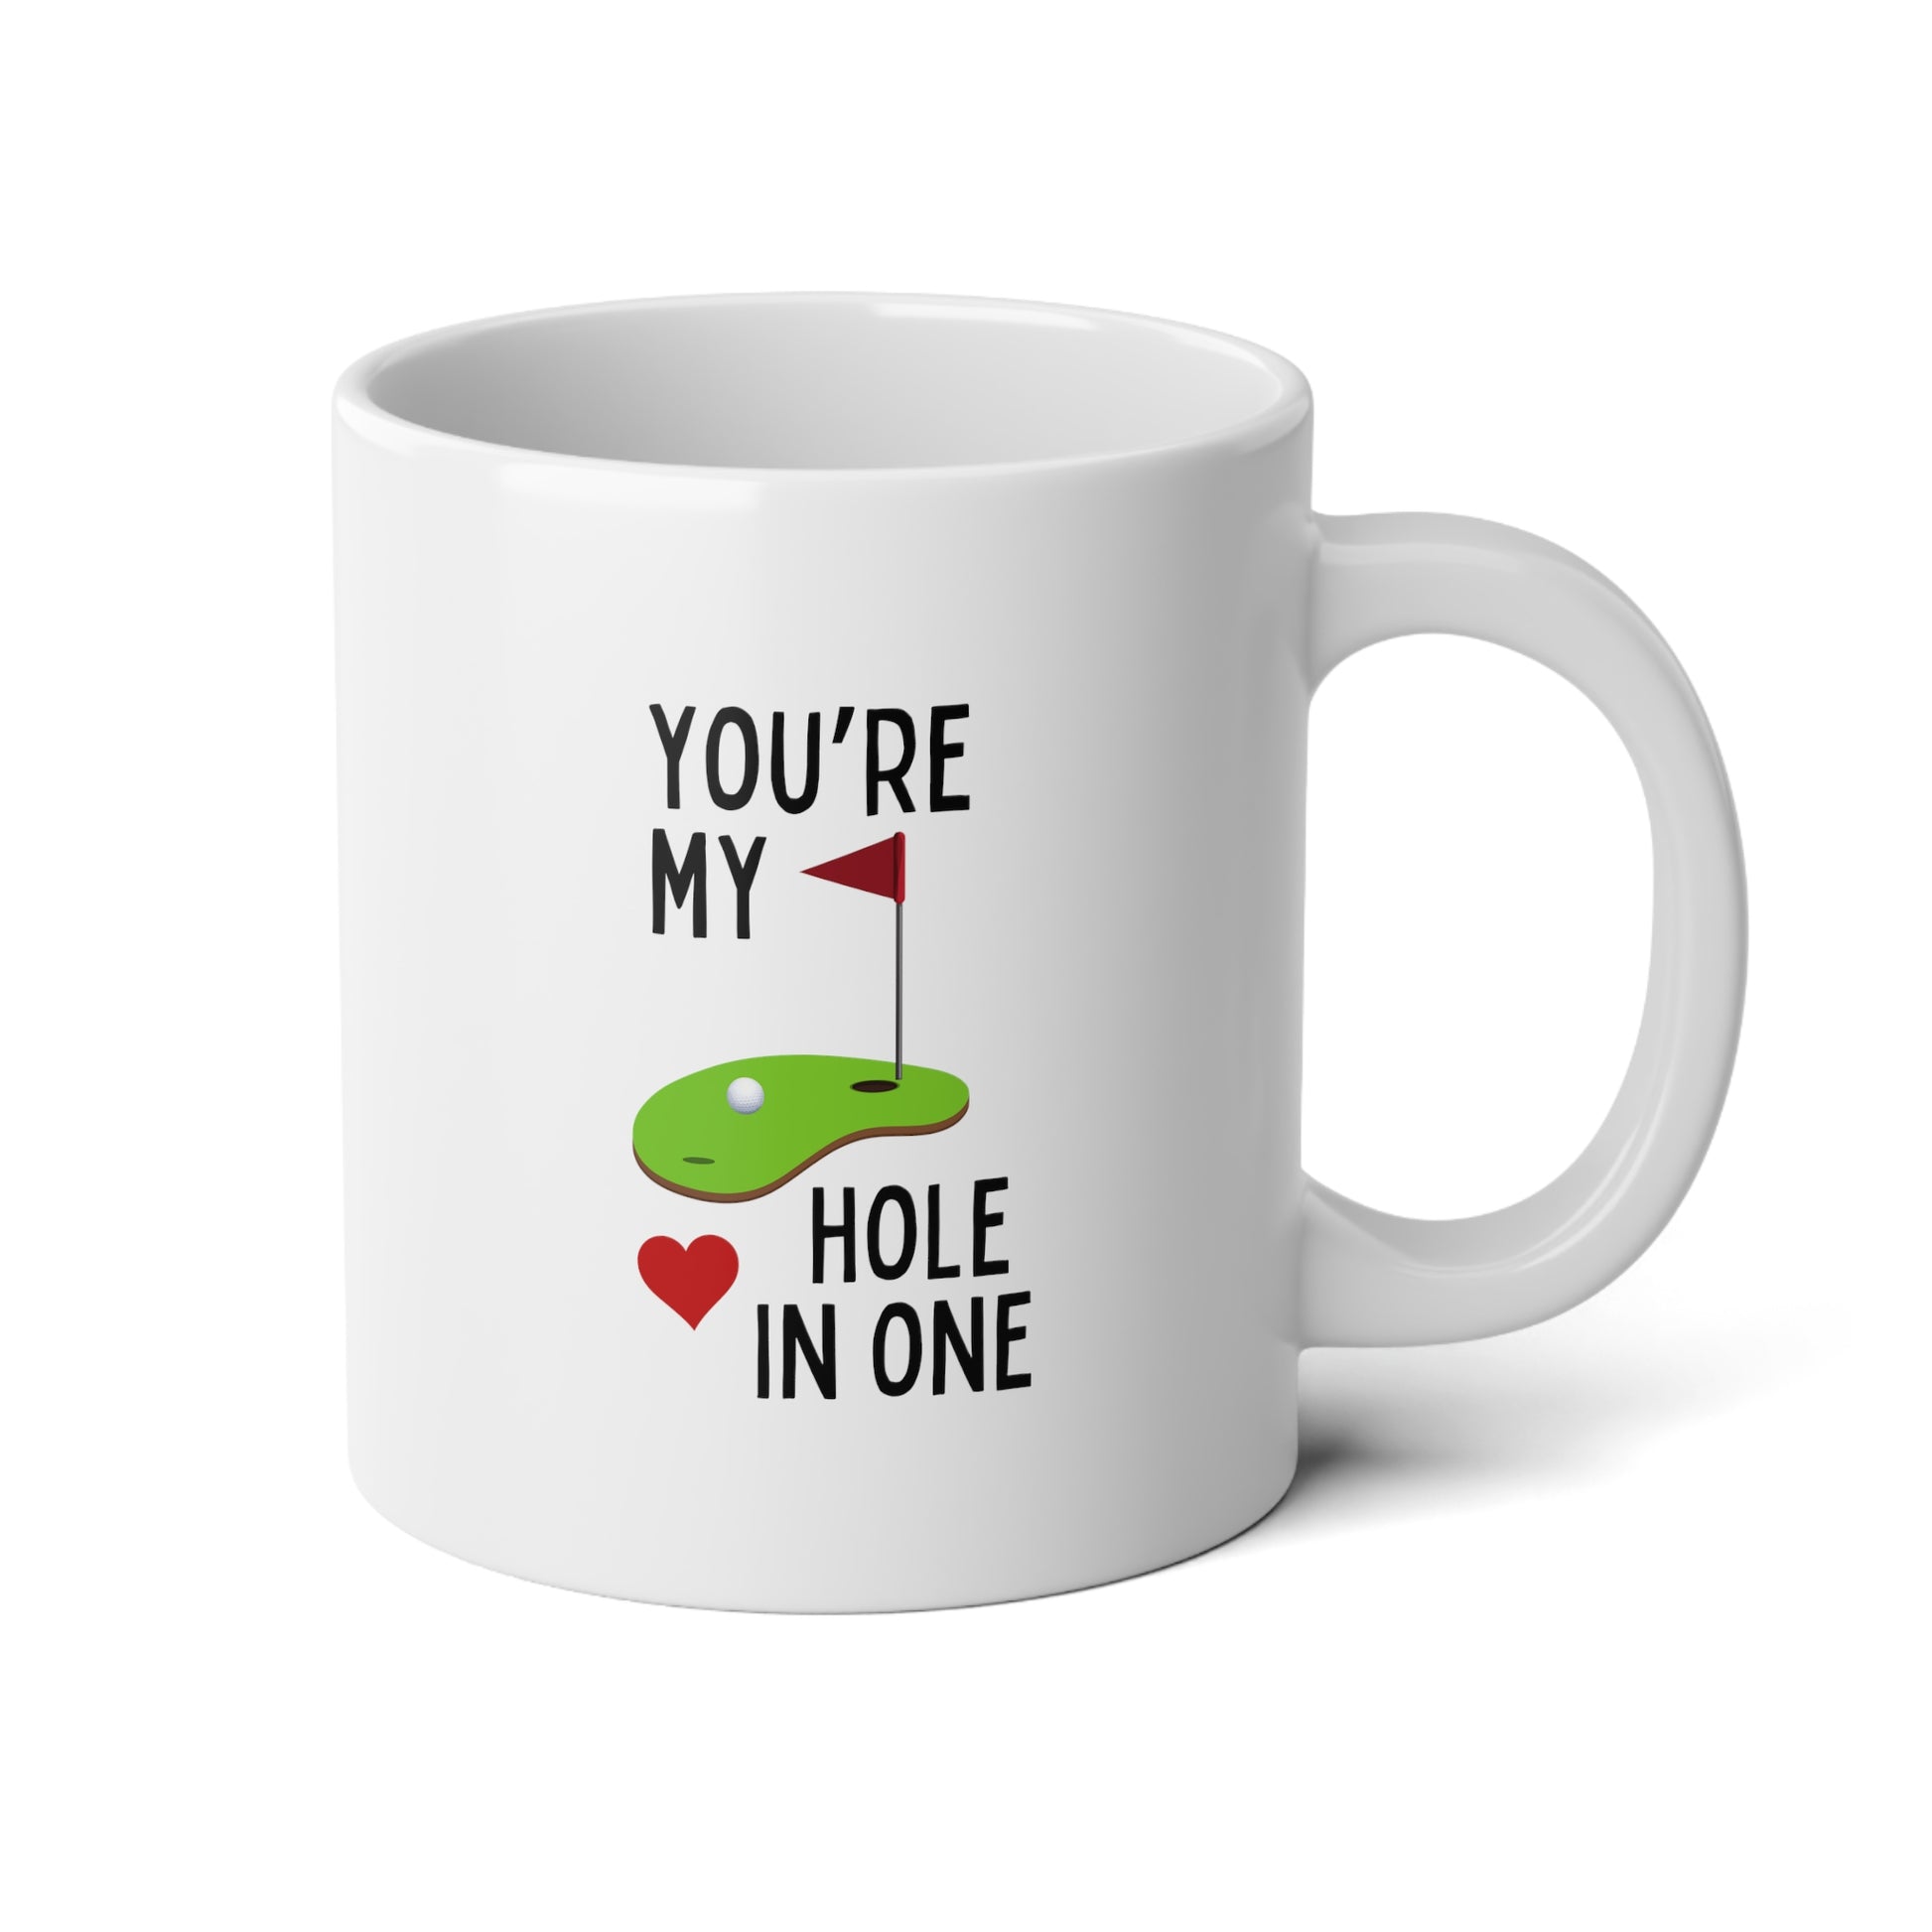 You're My Hole In One 20oz white funny large coffee mug gift for golf player lover husband boyfriend golfer waveywares wavey wares wavywares wavy wares